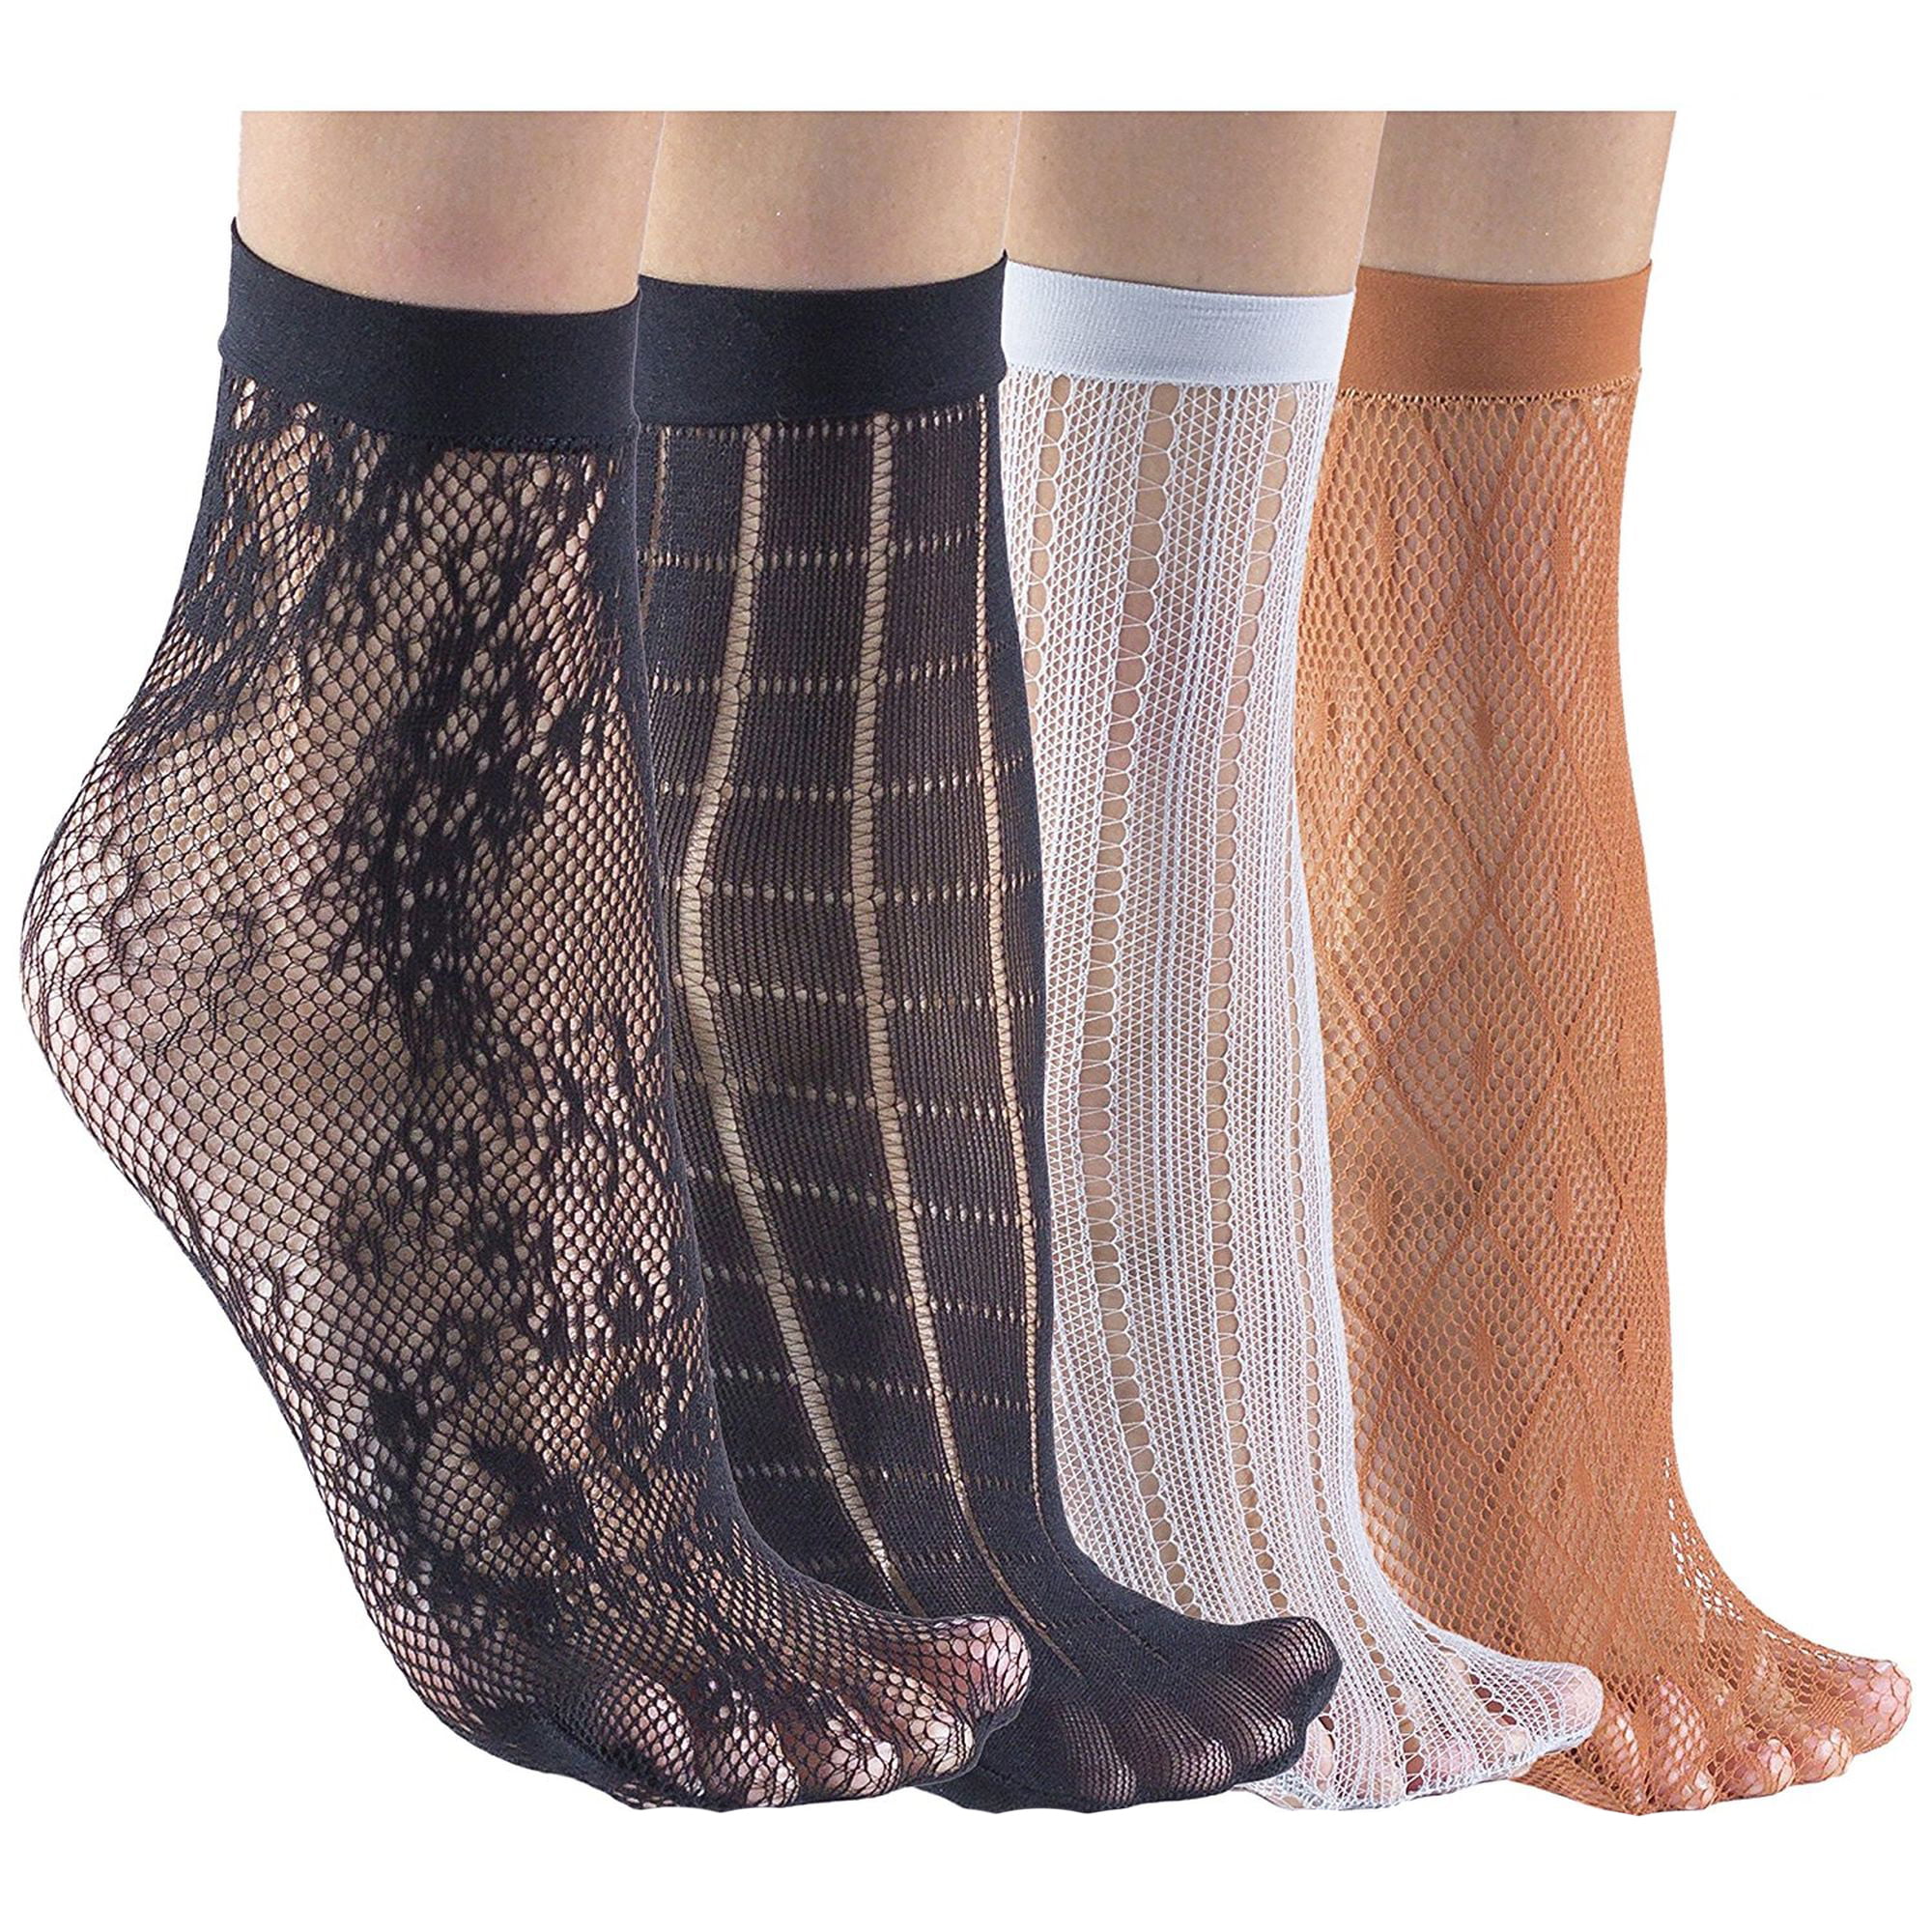 LACE SHEER VARIOUS COLOURS & DESIGNS NEW FANCY LADIES ANKLE SOCKS FISHNET 